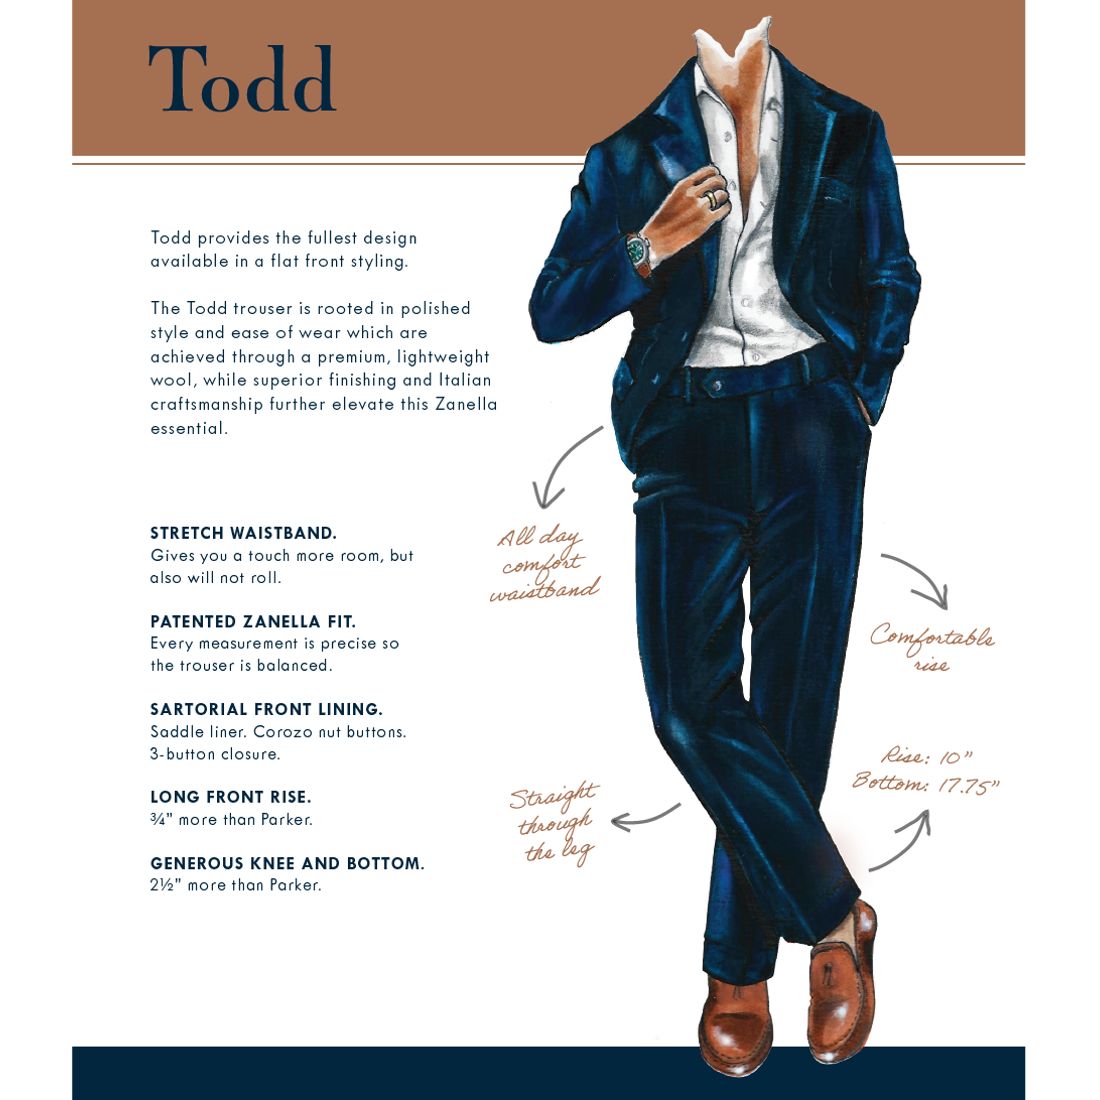 Todd Flat Front Super 120s Wool Flannel Trouser in Tan and Grey Mélange (Full Fit) - LIMITED EDITION by Zanella